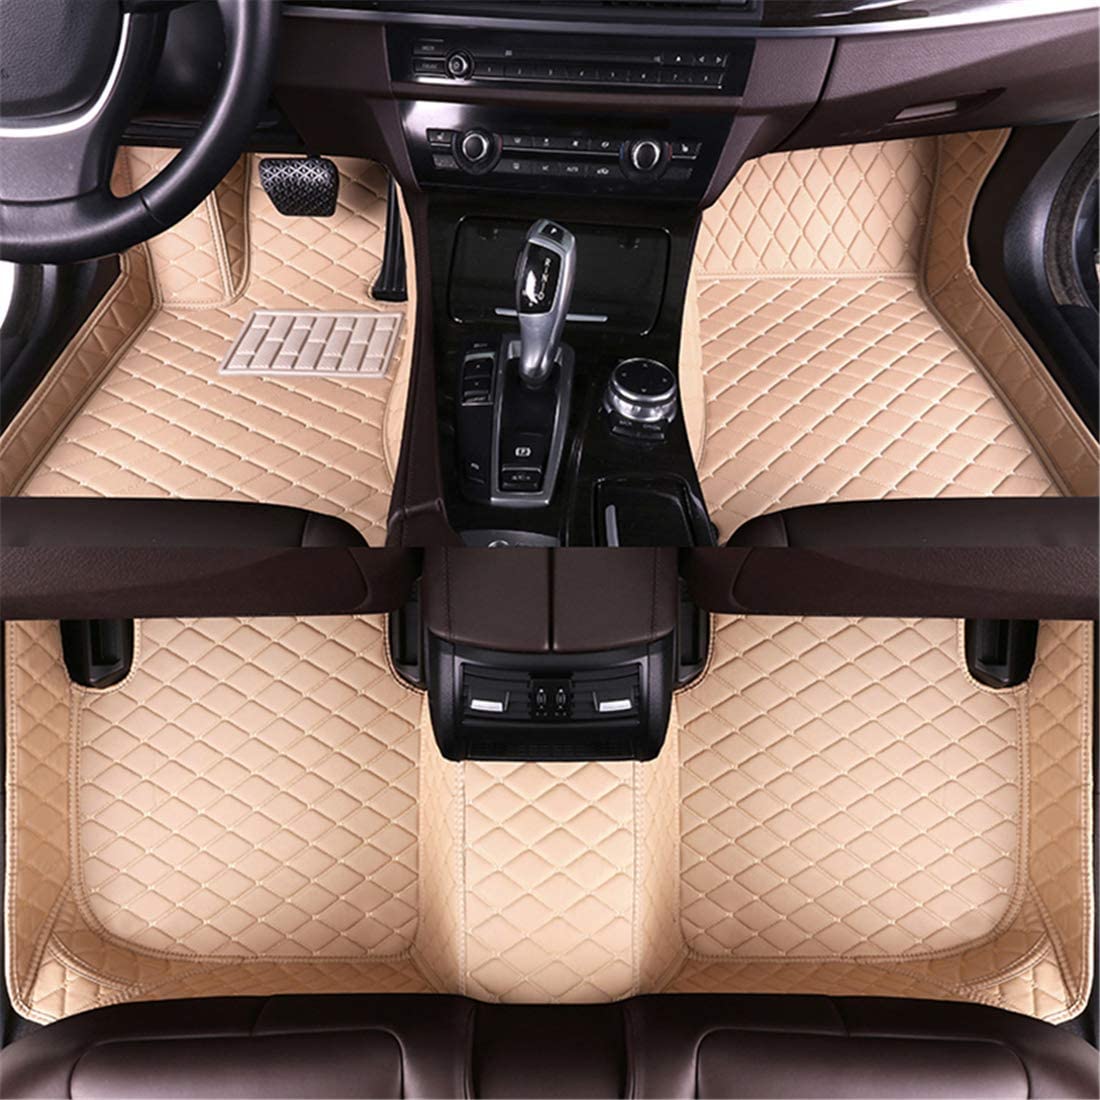 Car Floor Mats fit for Jaguar S-Type 2000-2007 Full Coverage All Weather Protection Non-Slip Leather Floor Liners - Delicate Leather